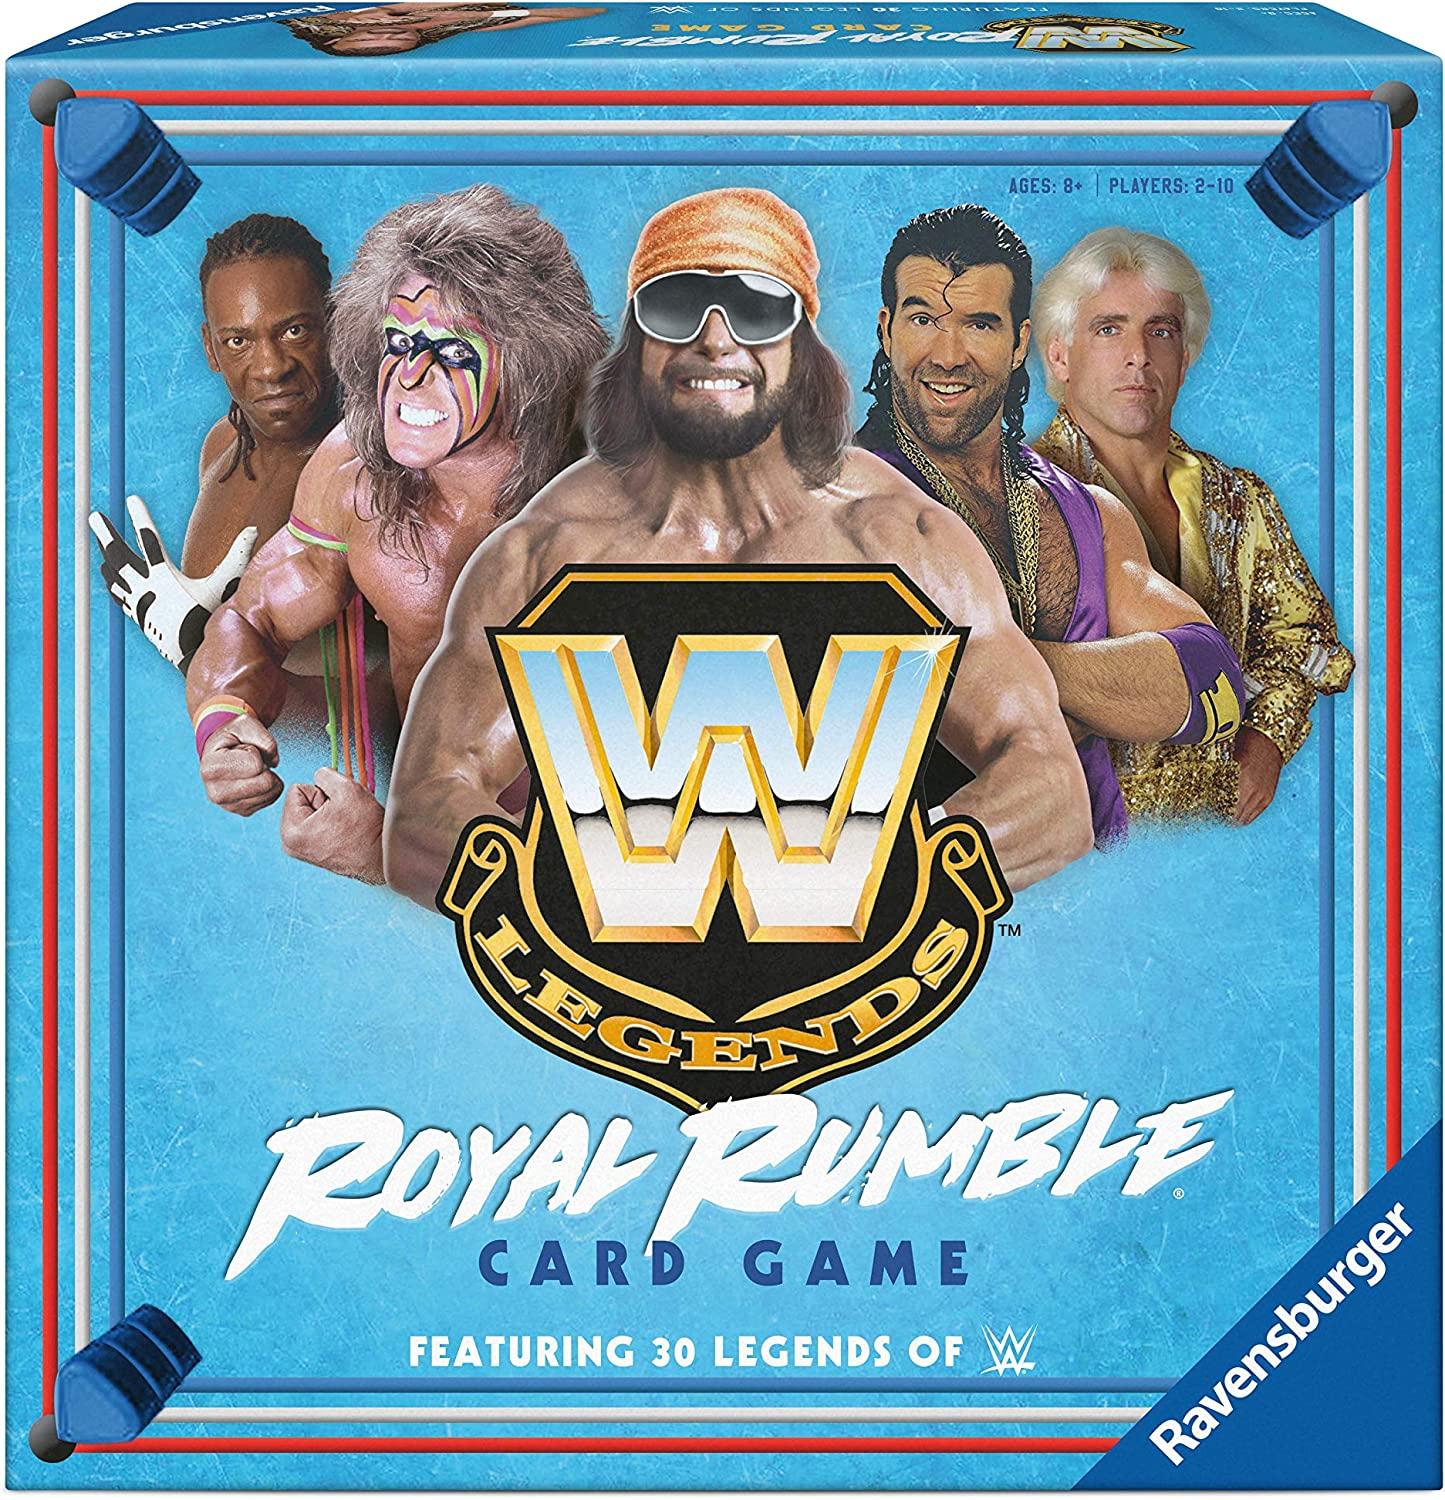 Enter the ring as a WWE legend and face off against your rivals in the WWE Legends Royal Rumble Card Game! use electrifying attacks and signature finishing maneuvers to eliminate your opponents!